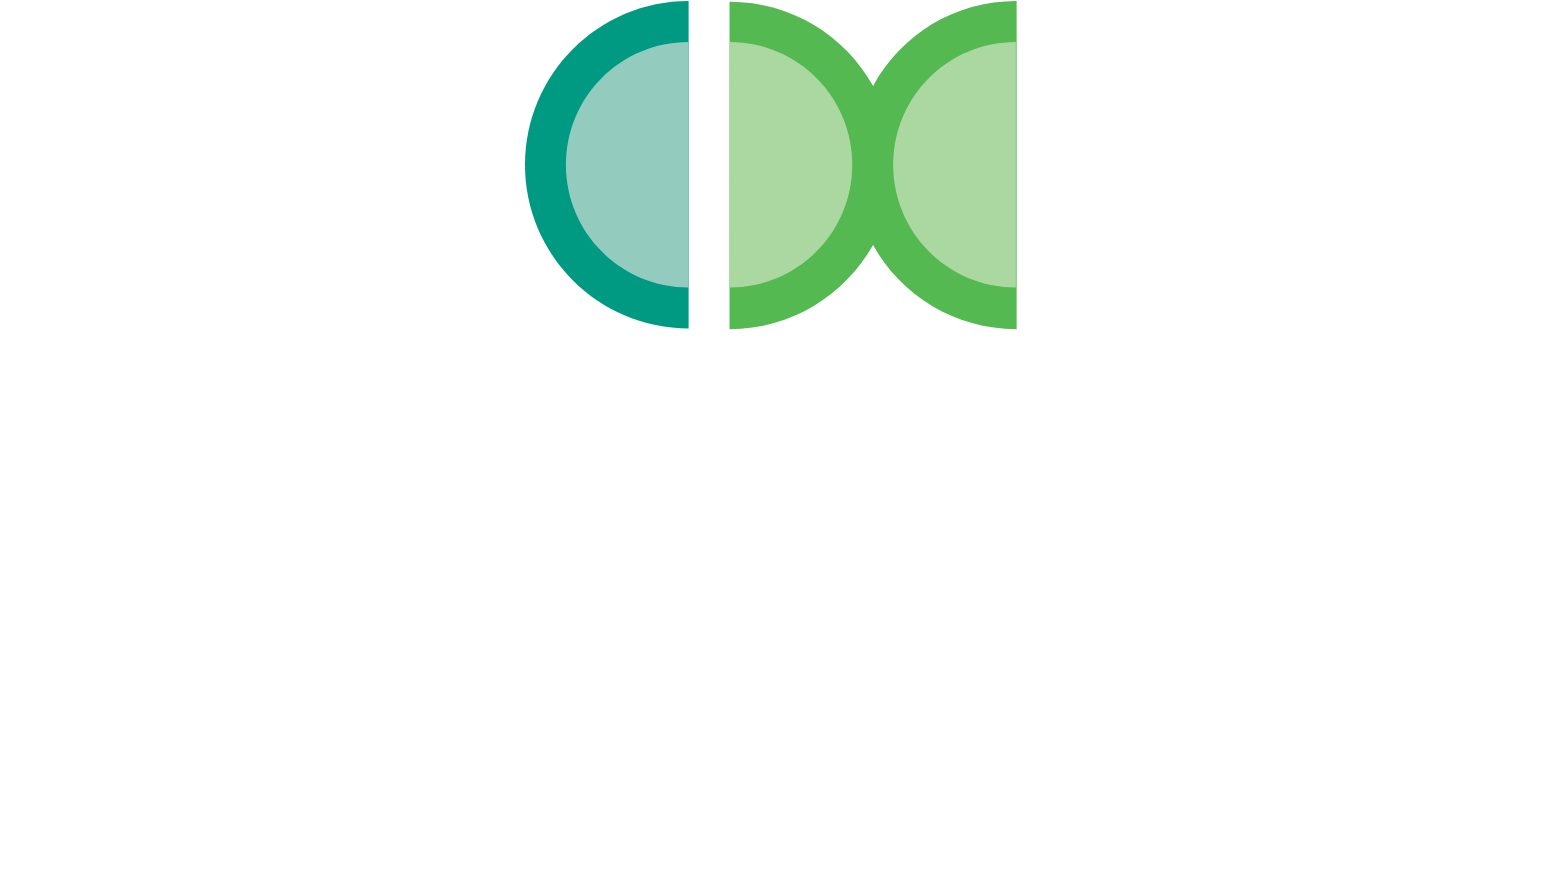 CytomX Therapeutics
 logo large for dark backgrounds (transparent PNG)